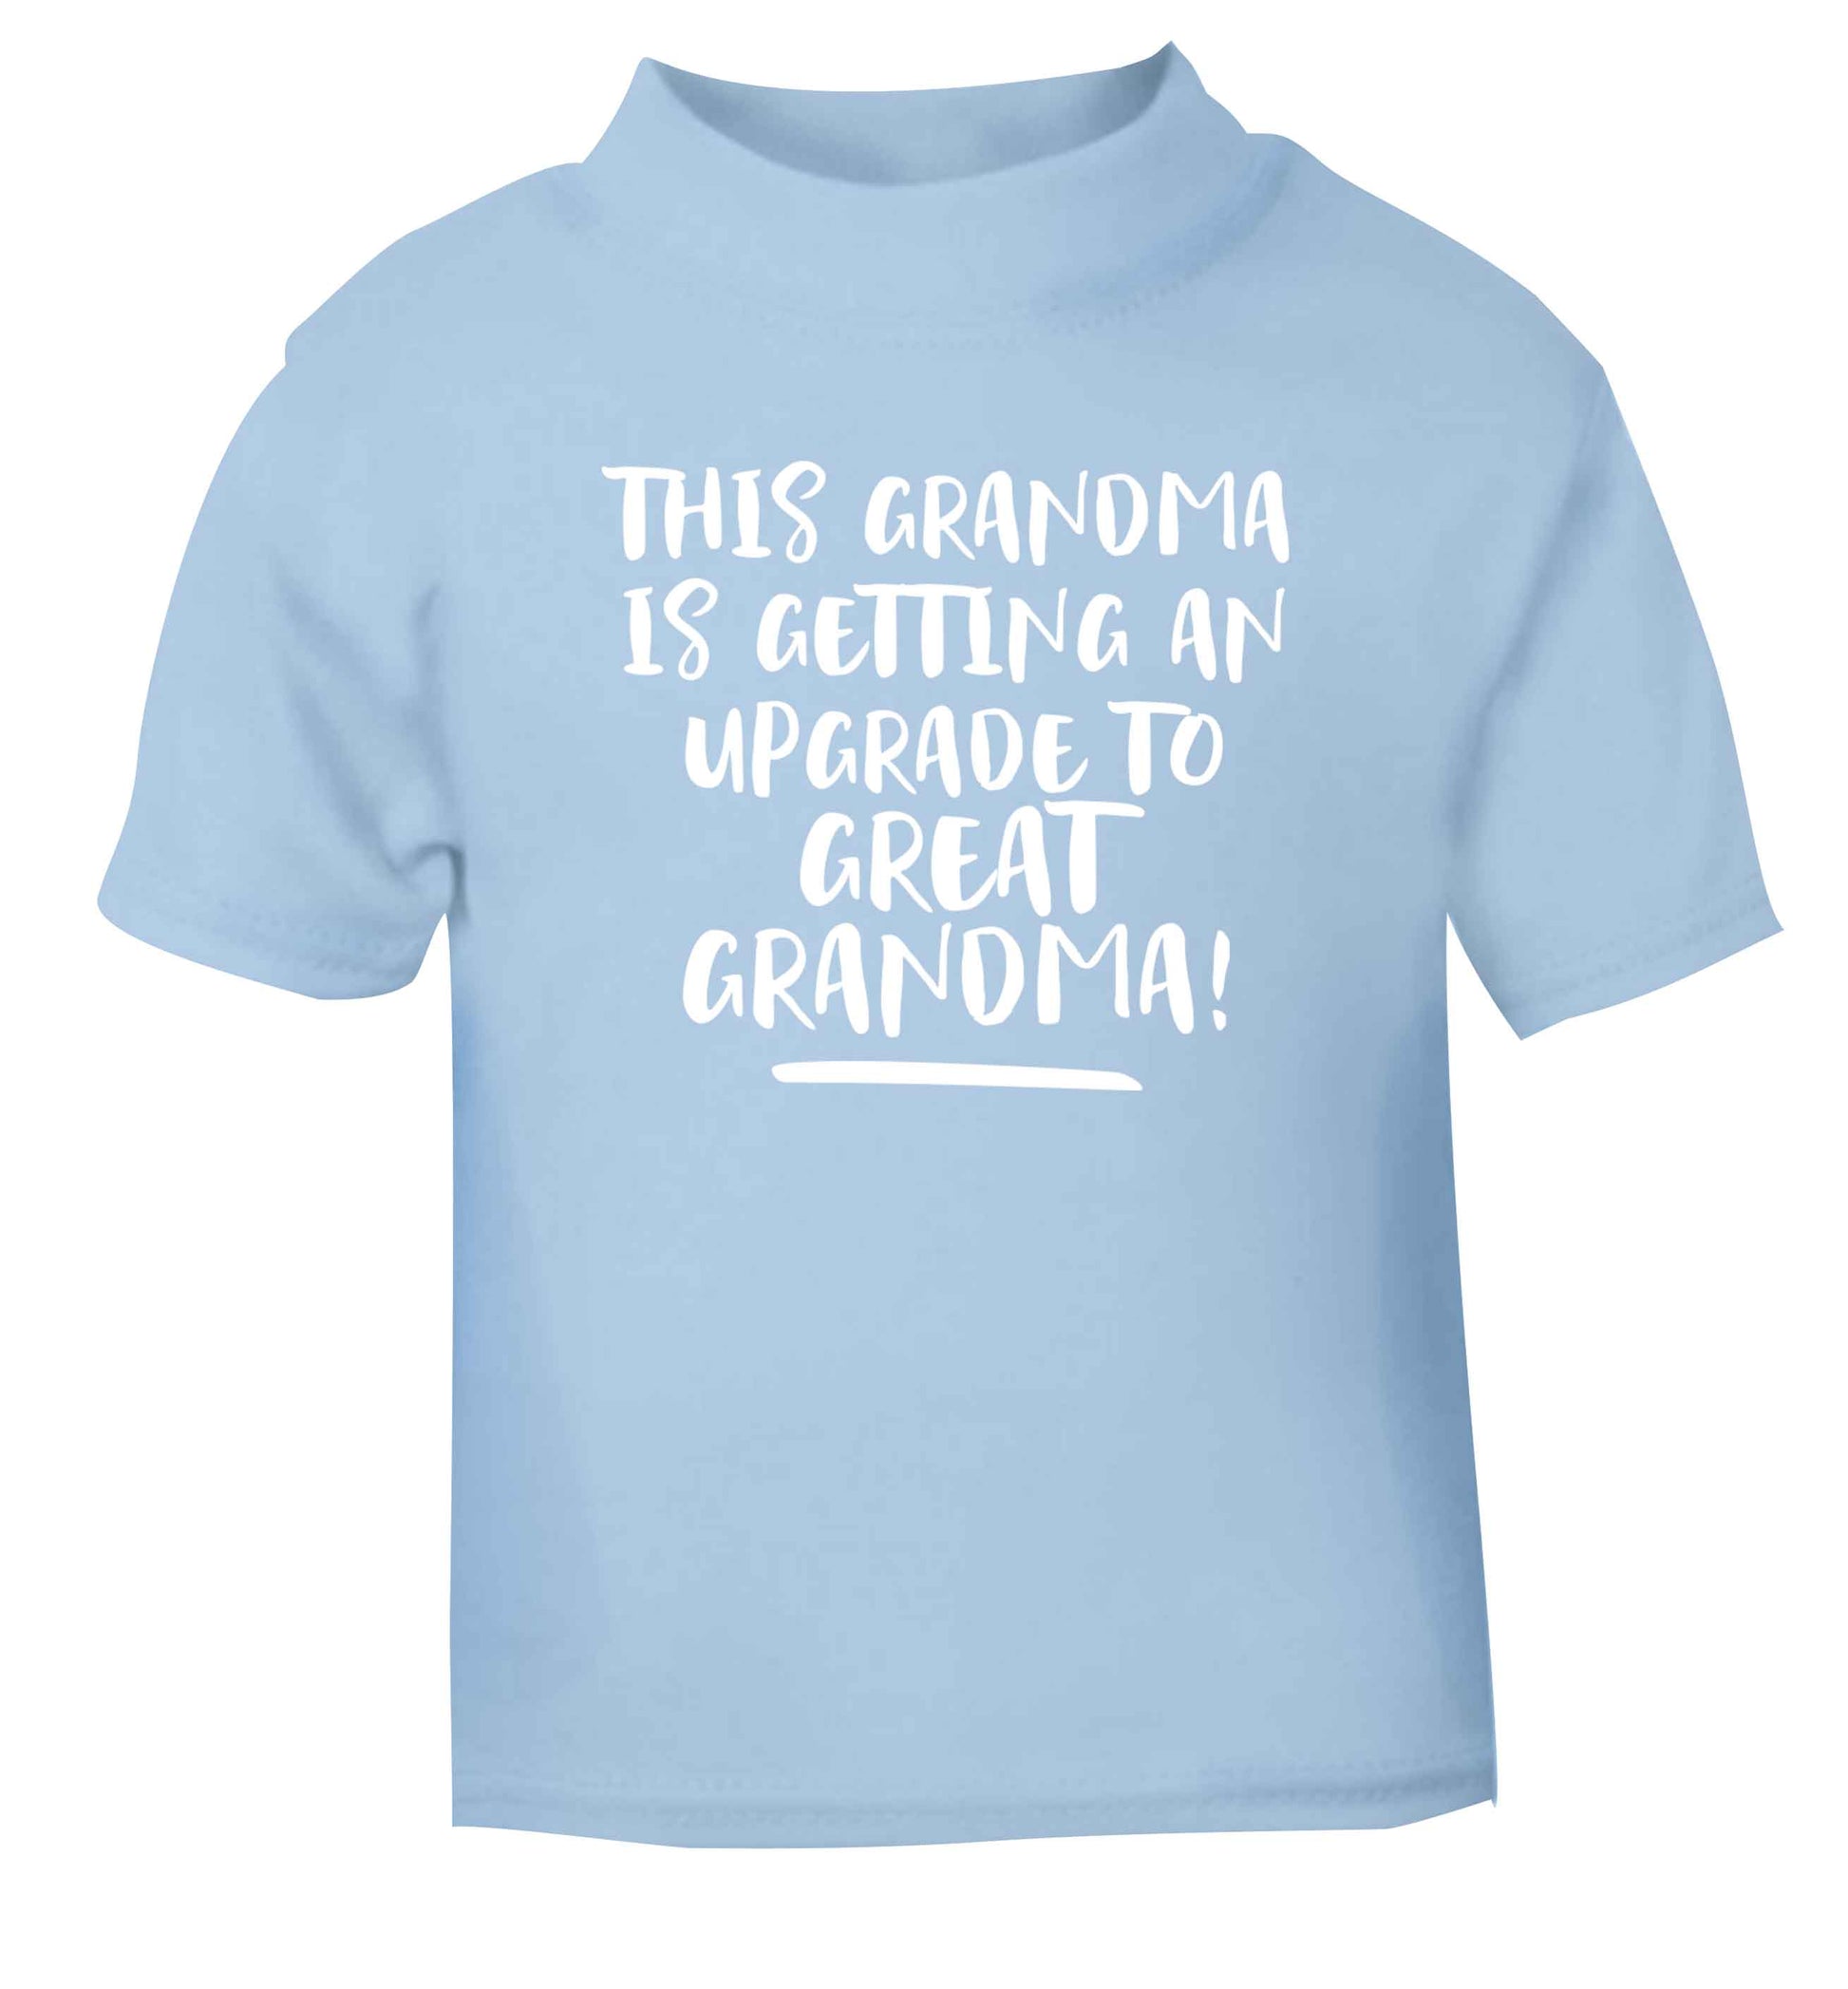 This grandma is getting an upgrade to great grandma! light blue Baby Toddler Tshirt 2 Years